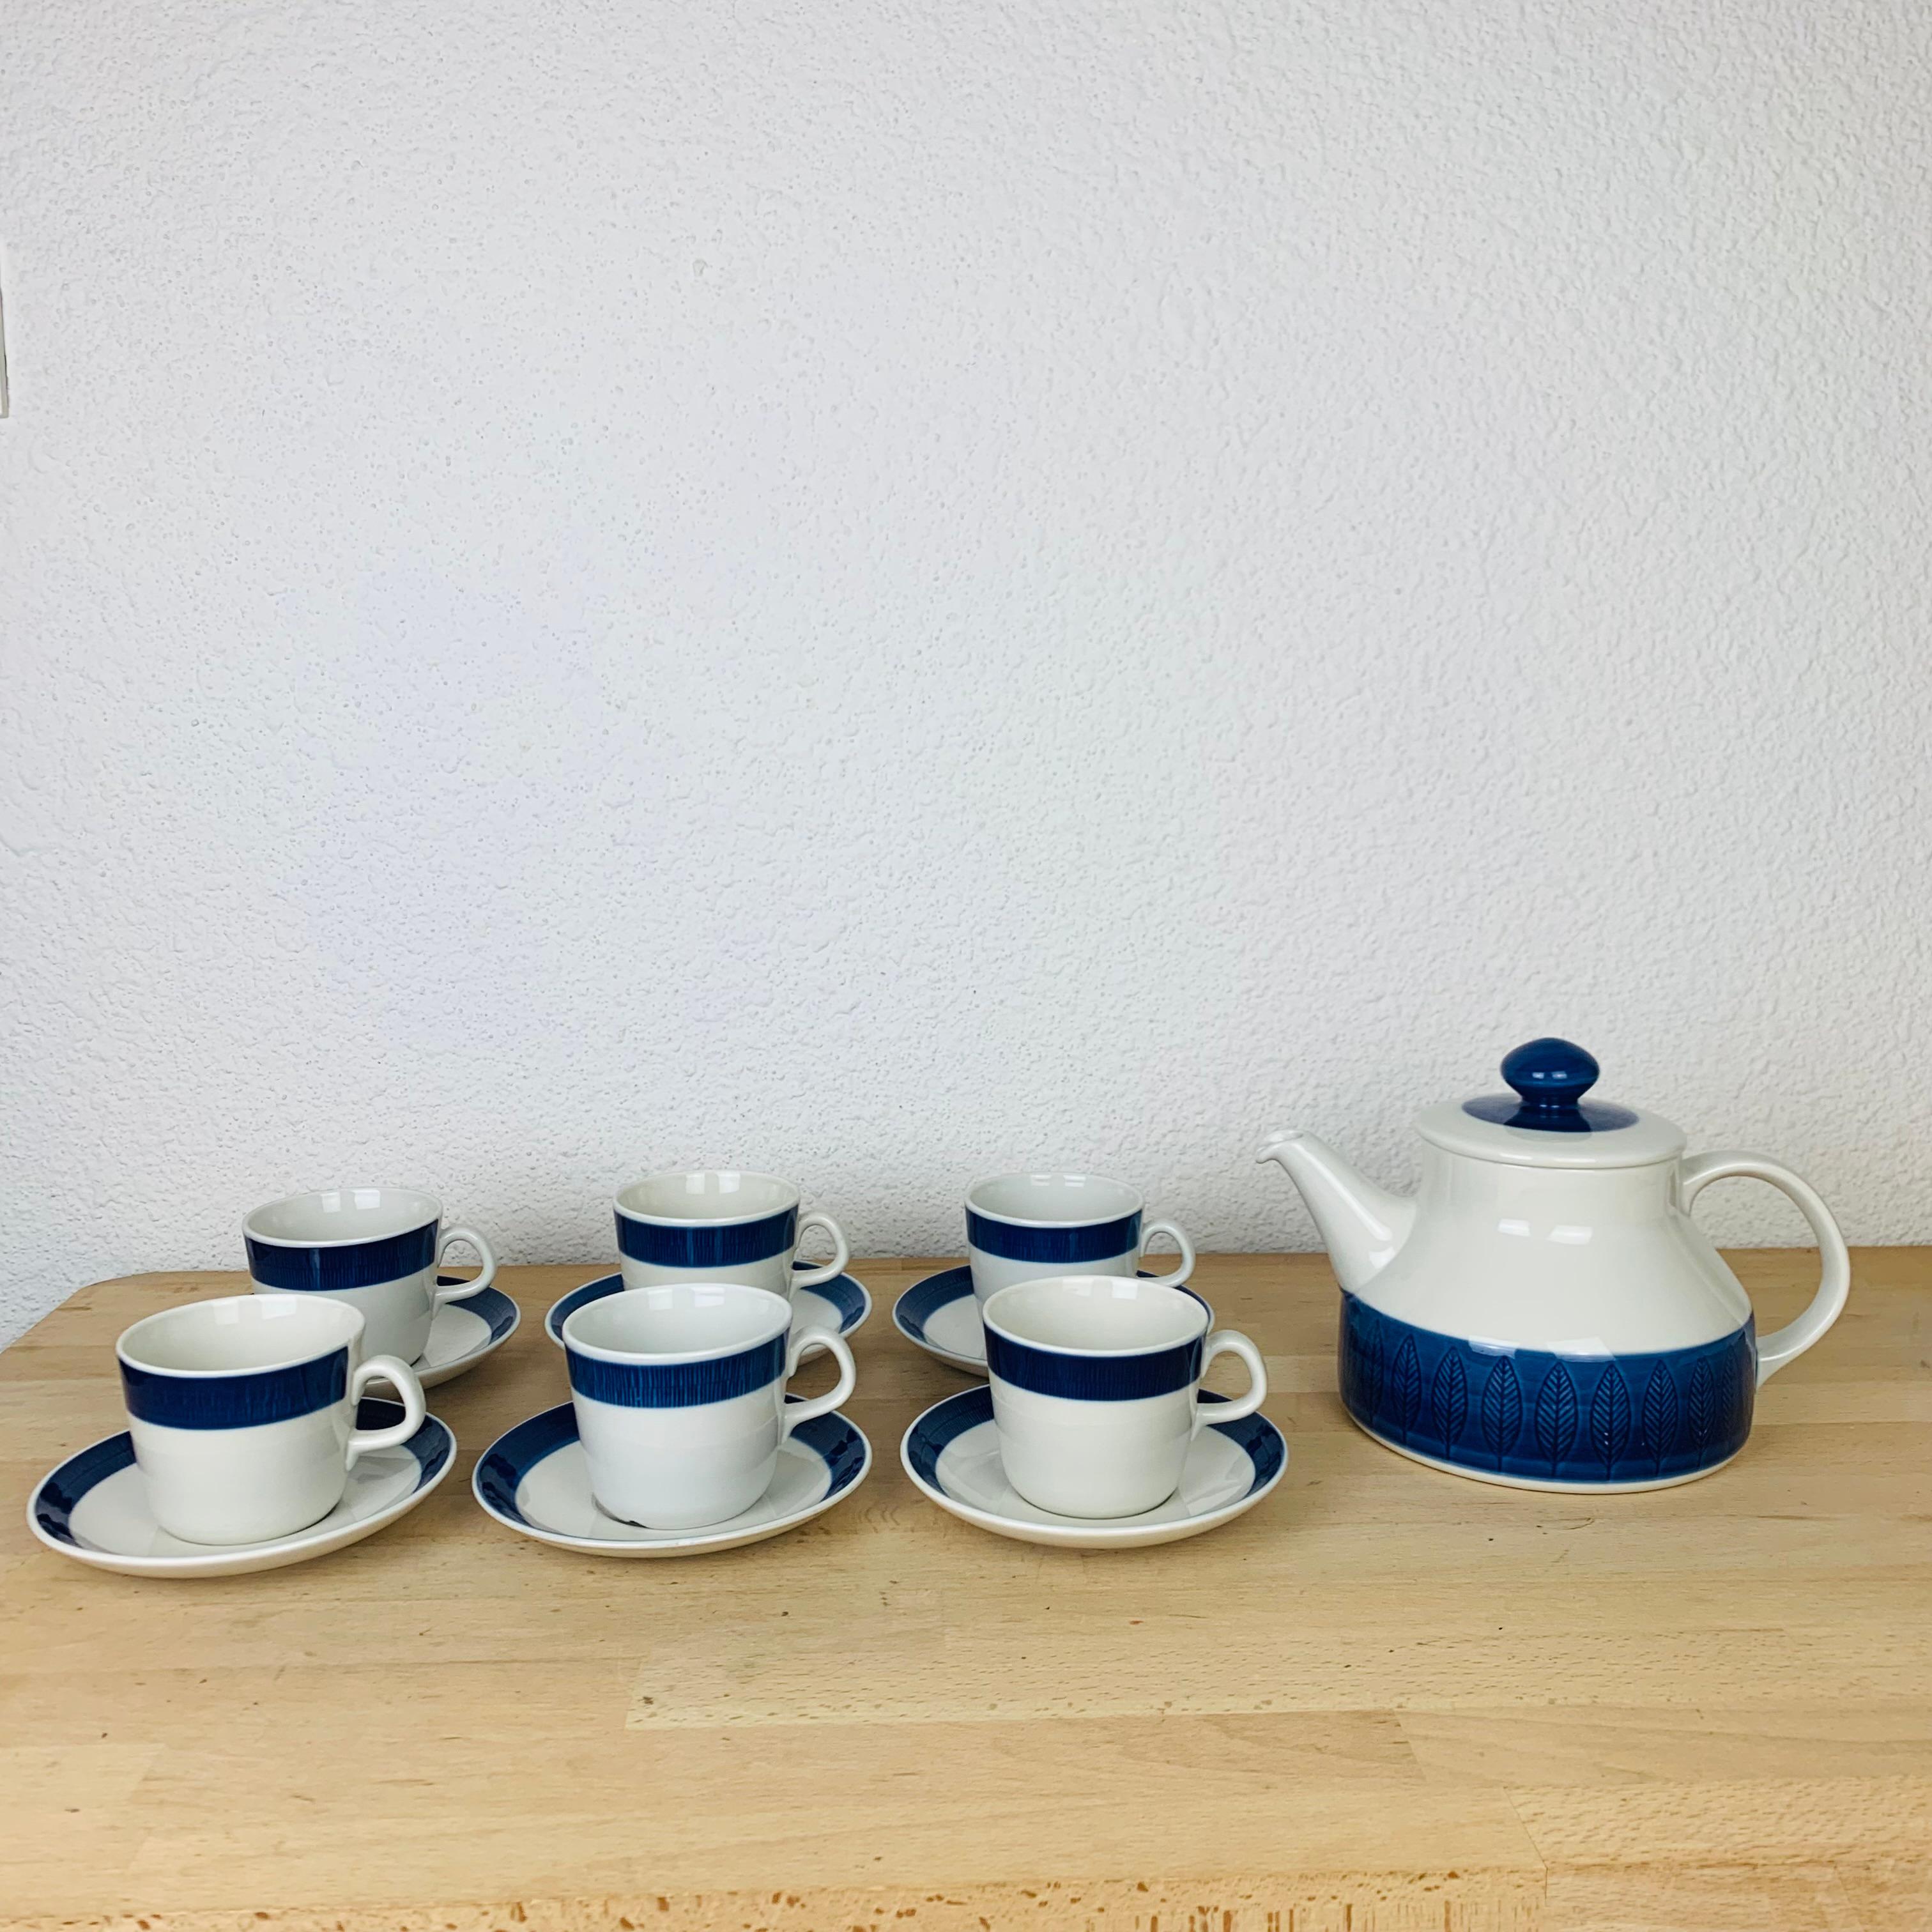 Koka tea set by Hertha Bengtson for Rörstrand Sweden, manufactured in the 1960's. This set contains a tea pot, six cups and six saucers. 

Slight wear due to its age and use, no chip, no crack. 

Measurements of the tea pot : height 16 cm, total